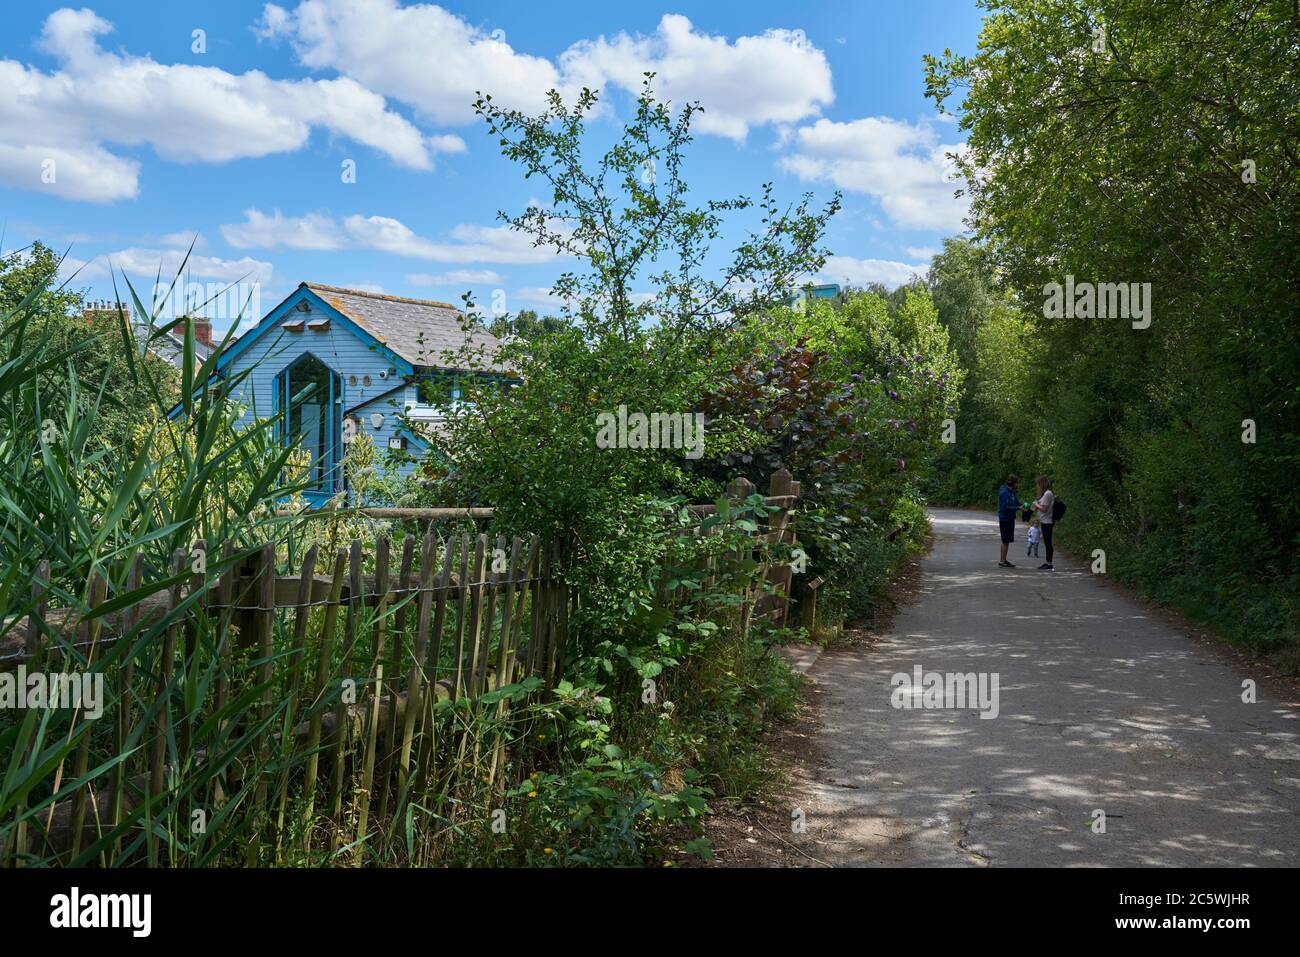 The Islington Ecology Centre and lane in Gillespie Park, Highbury, North London UK Stock Photo